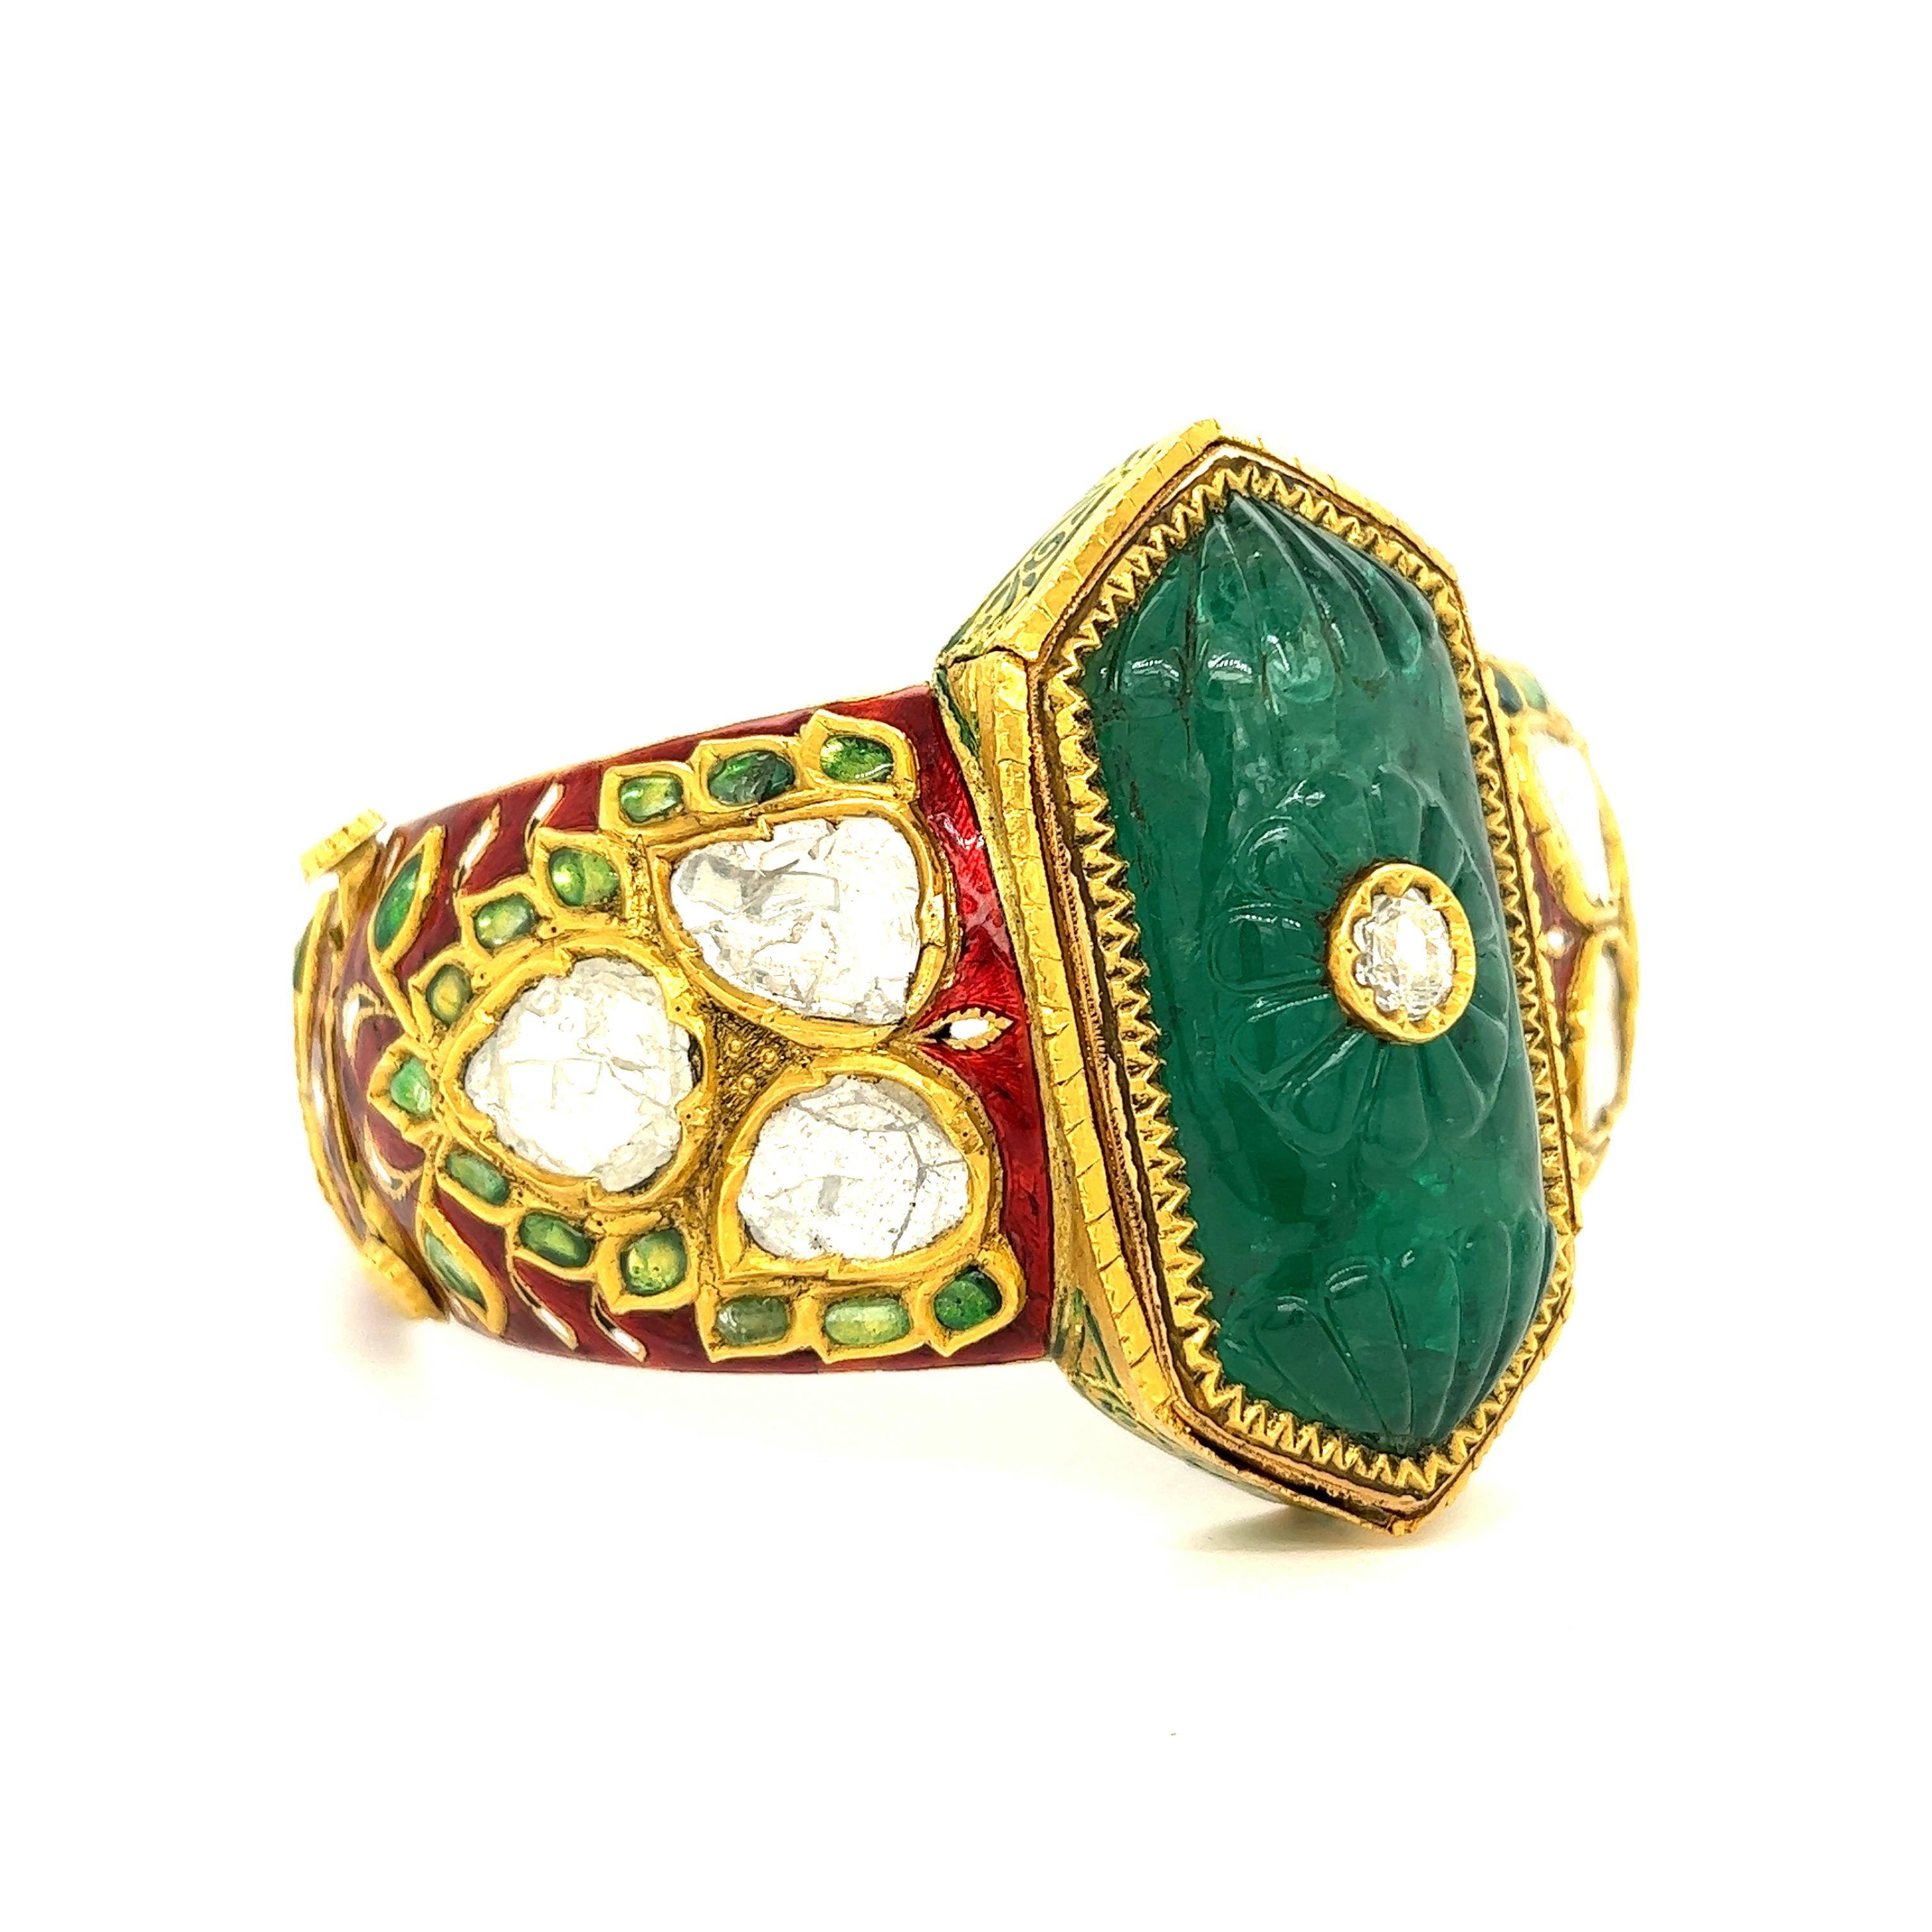 Indian Carved Emerald Diamond Enamel Bangle Bracelet

Carved emerald of approximately 45-50 carats, rose-cut diamonds of approximately 6-8 carats total, featuring transparent red enamel set on yellow gold; center piece emerald (4.8 cm x 2.7